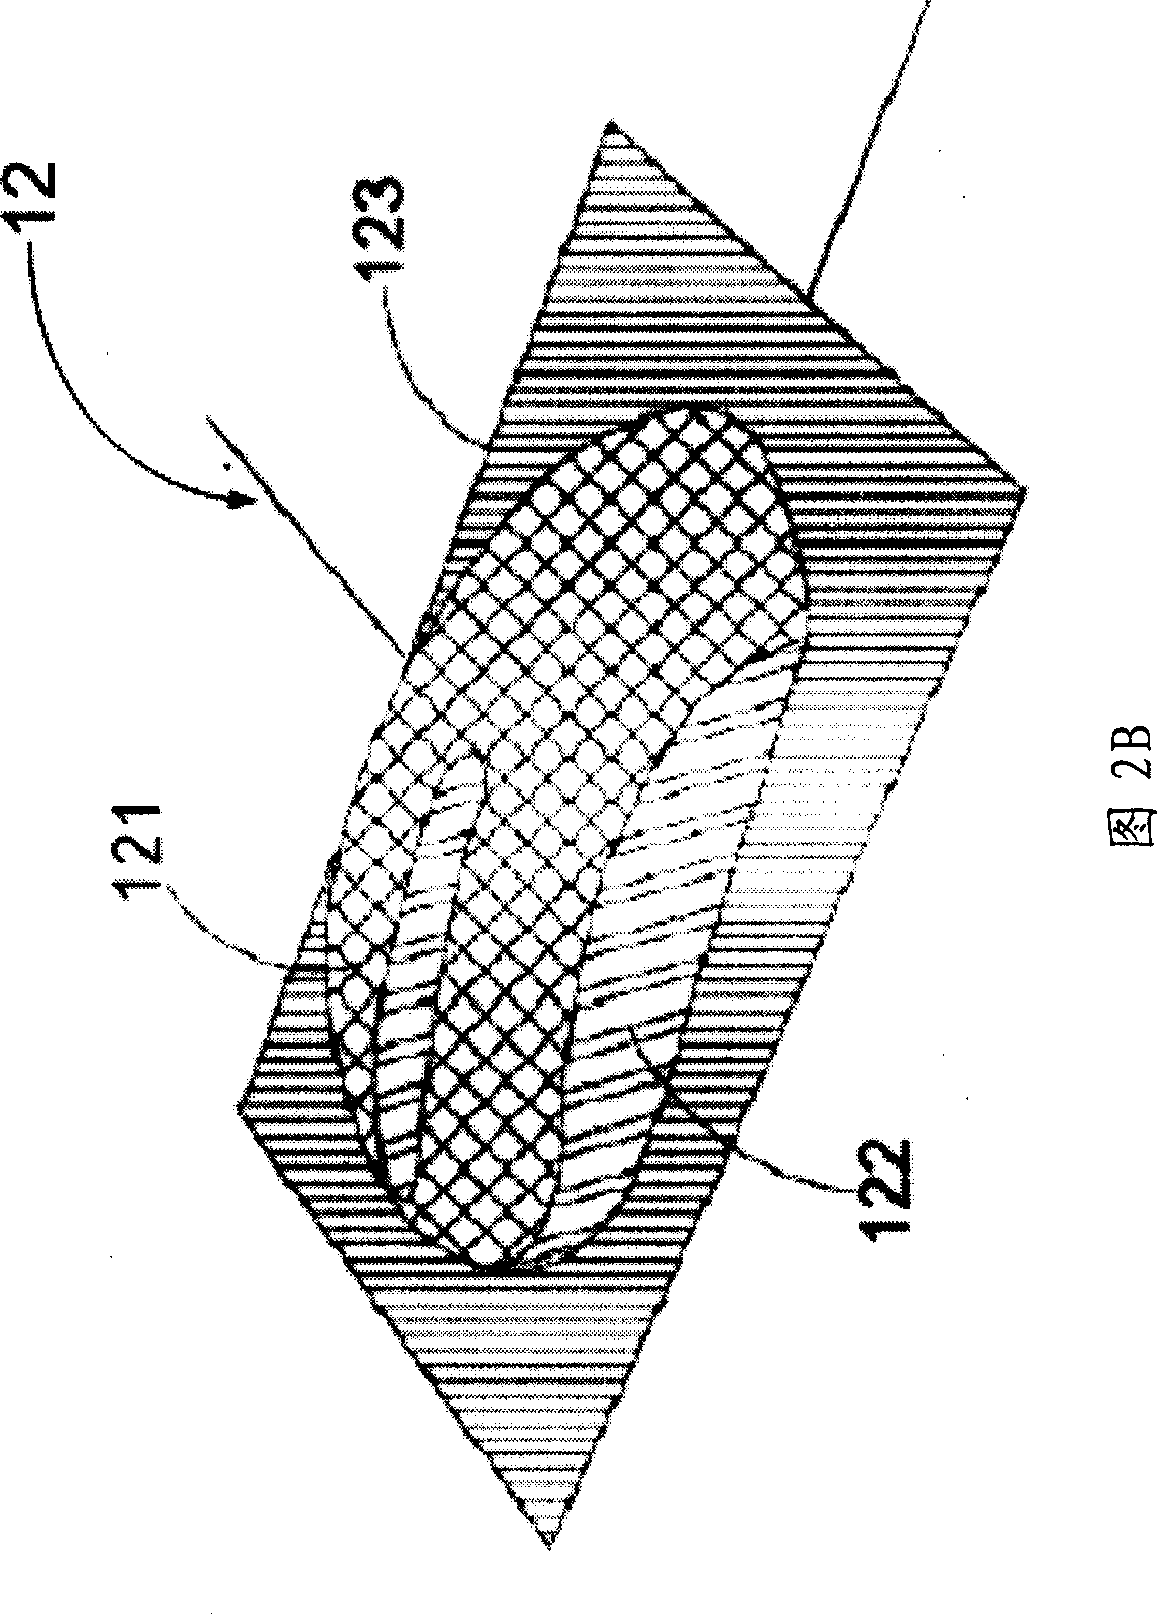 Analysis method used for in-mold decoration injection molding